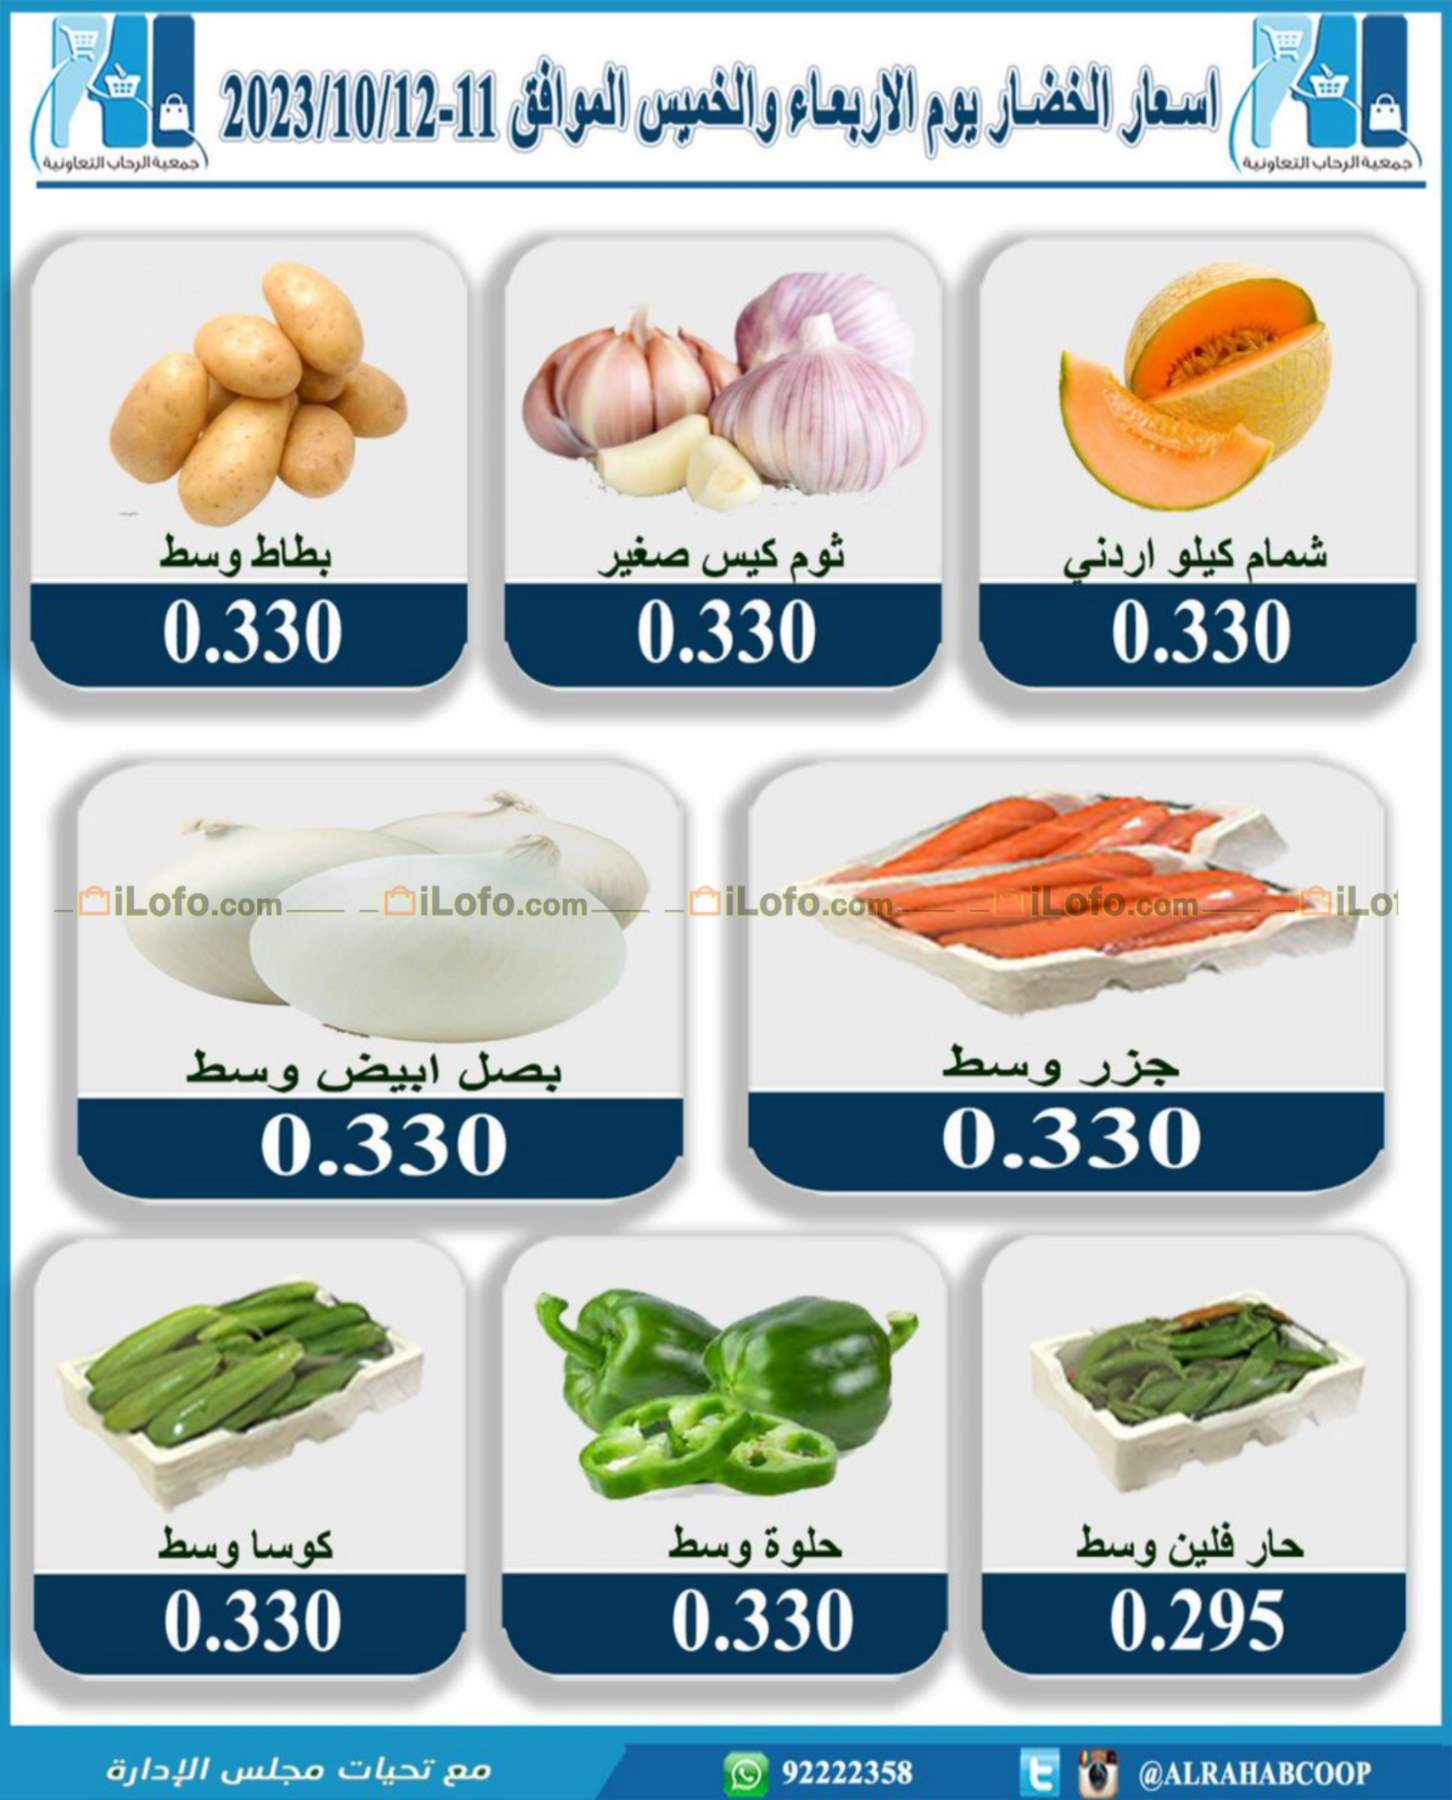 Page 3 at Fruits & Vegetables Offers at Rehab coop Kuwait